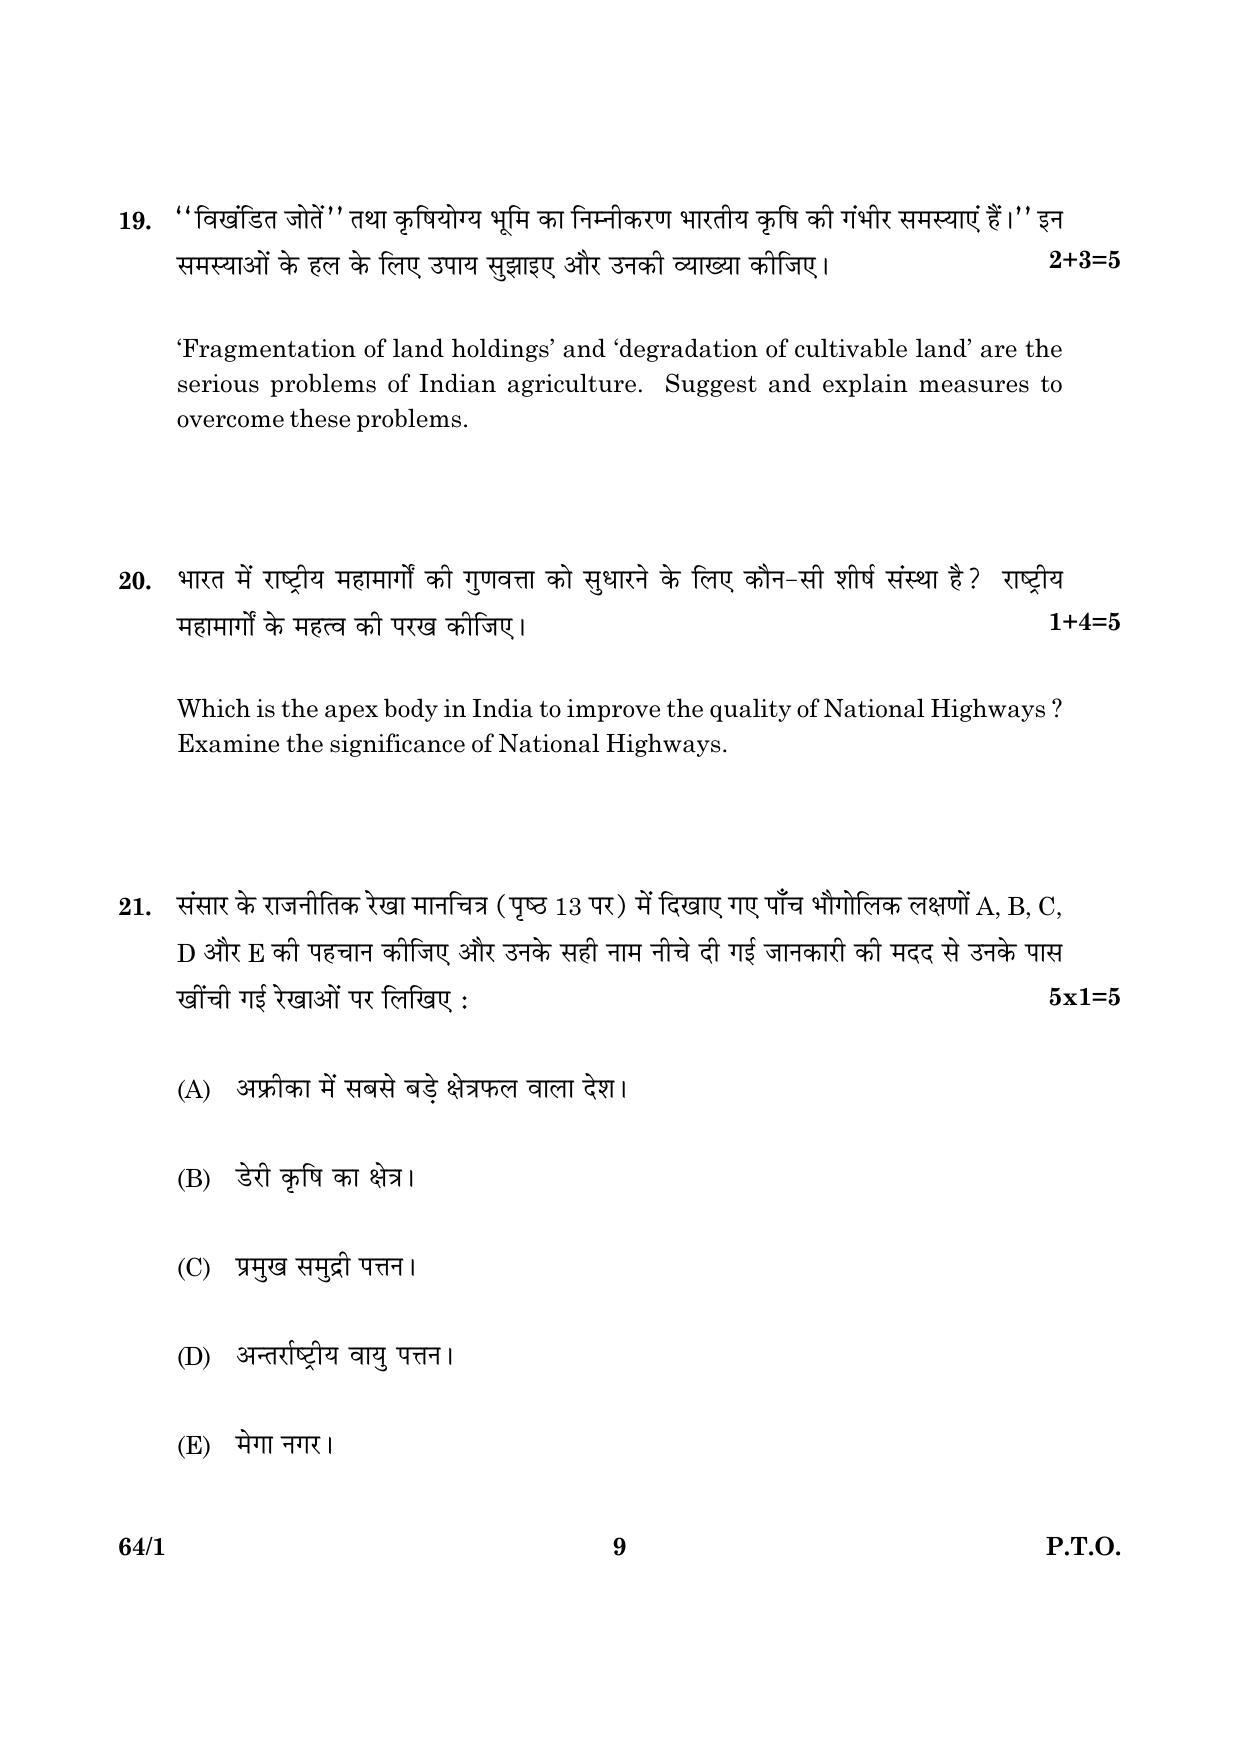 CBSE Class 12 064 Set 1 Geography 2016 Question Paper - Page 9